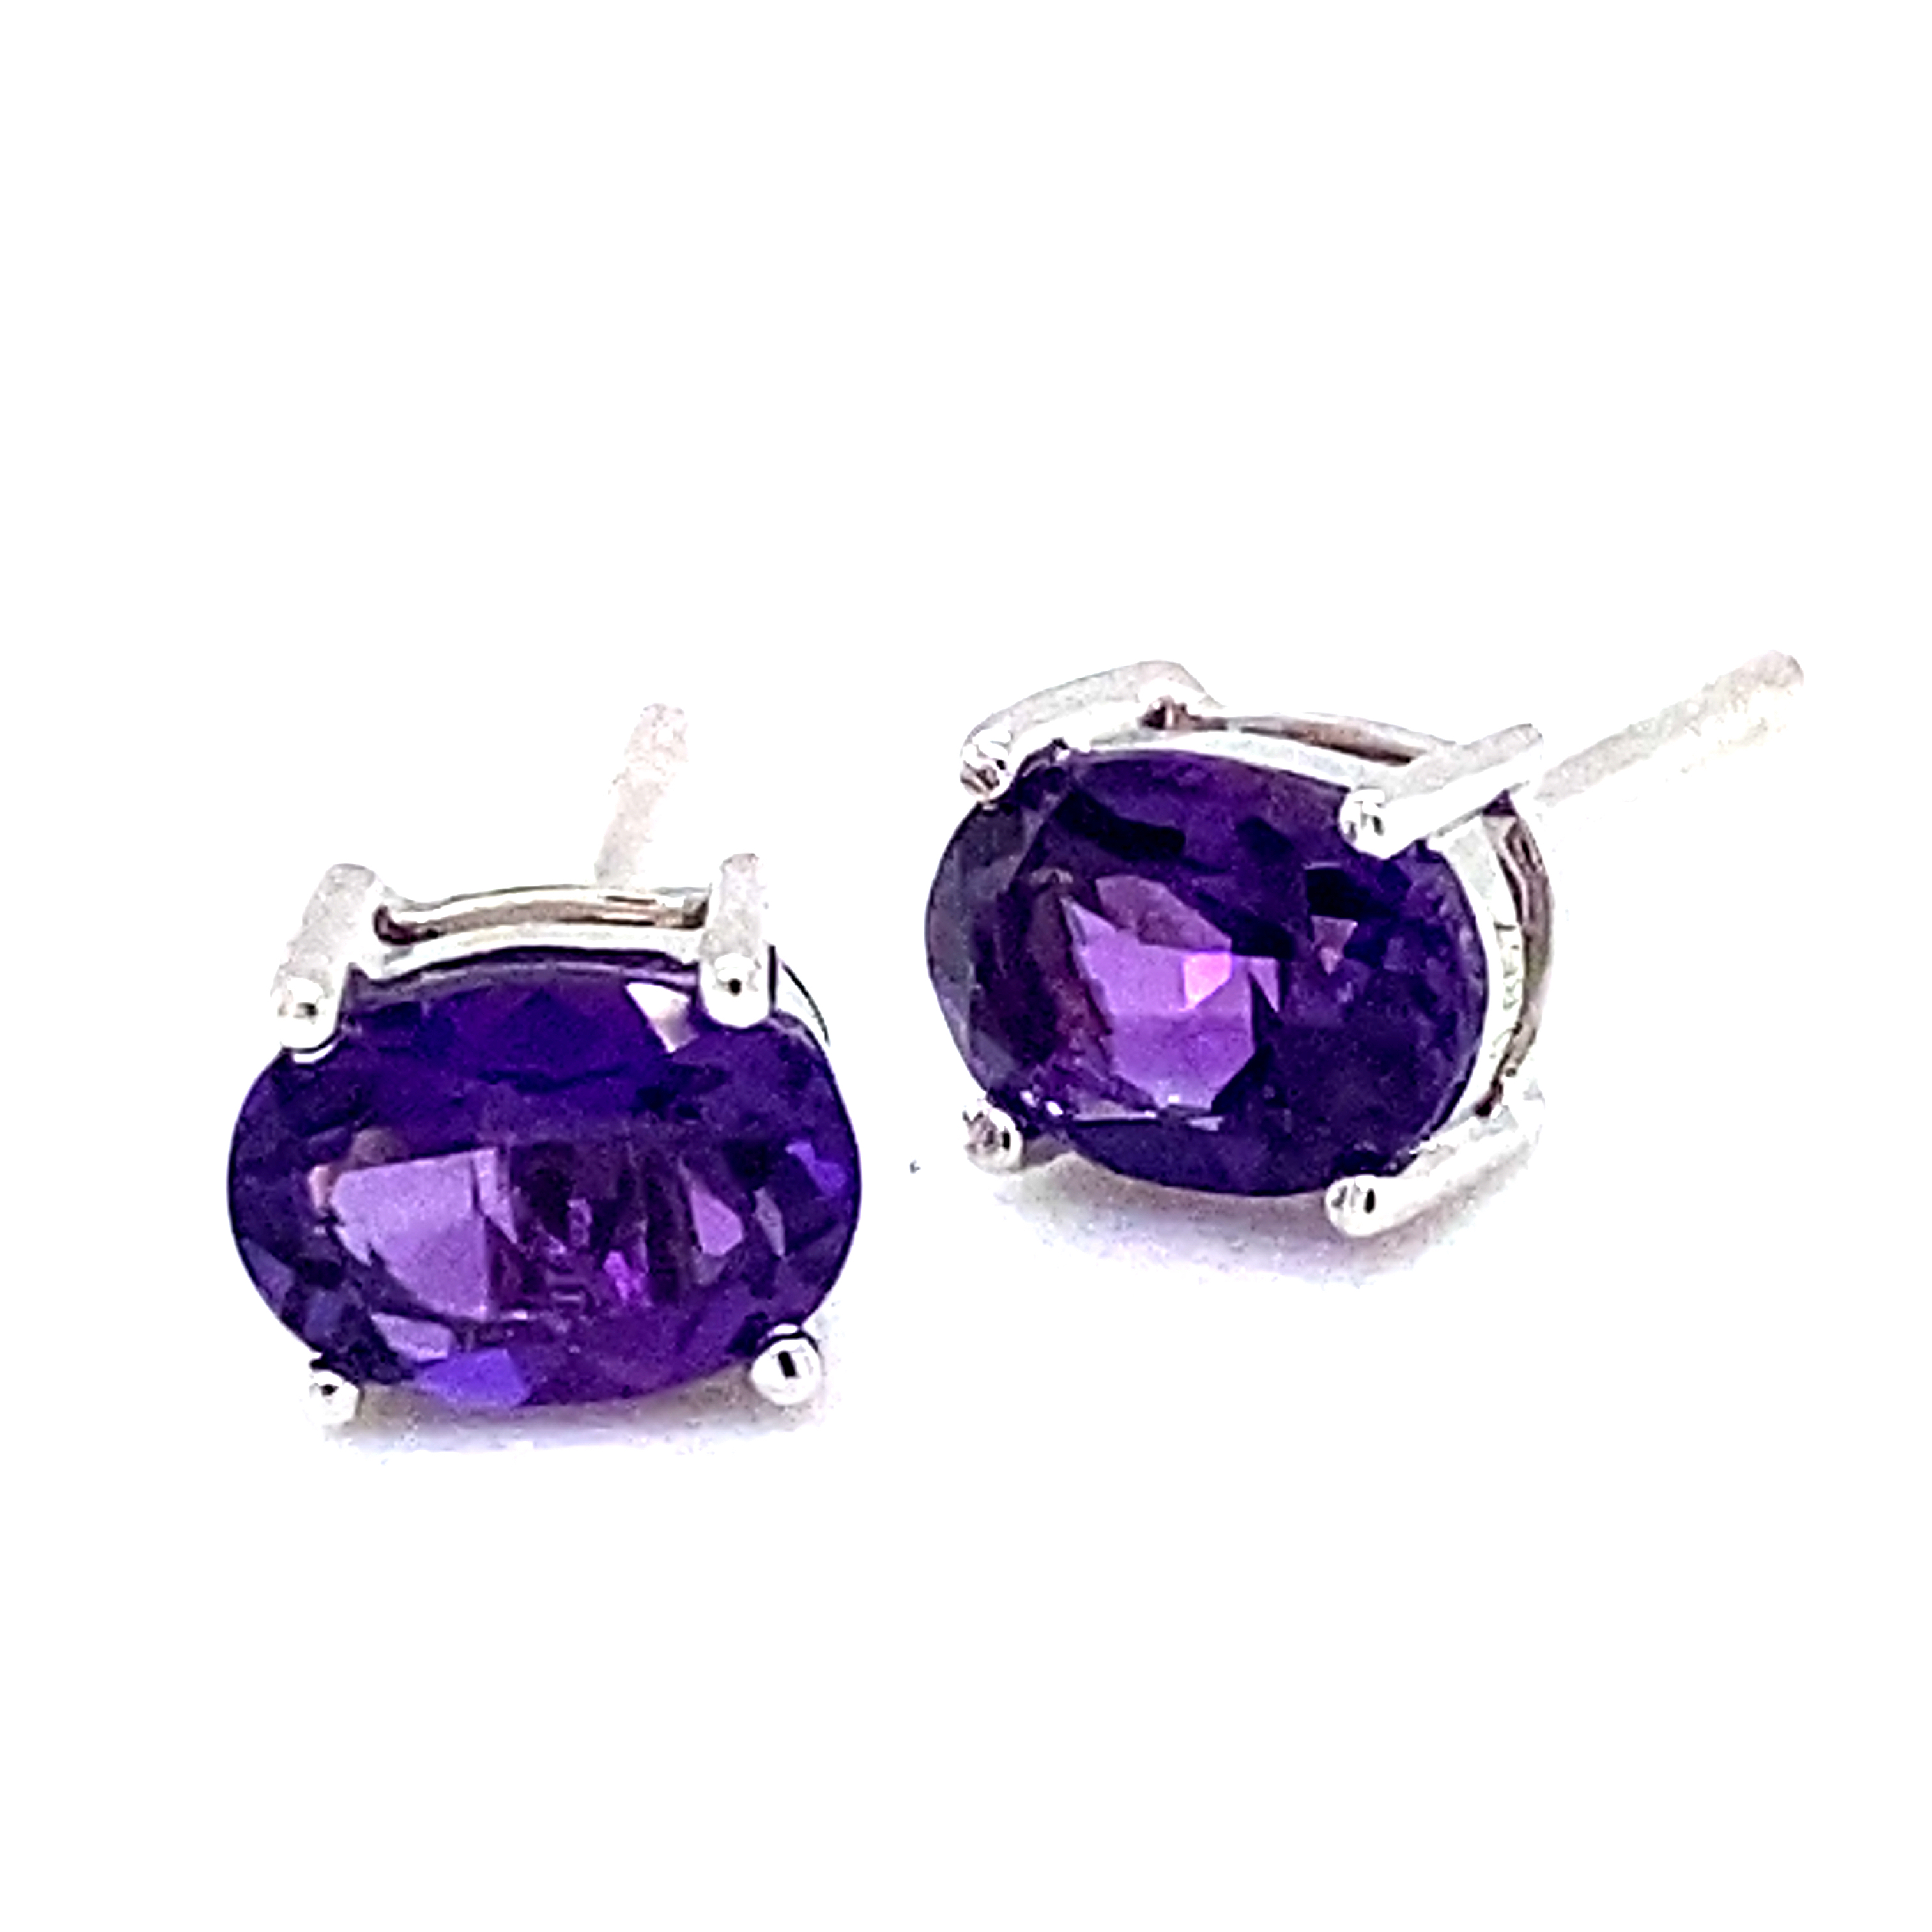 18 carat White Gold Oval Amethyst Studs